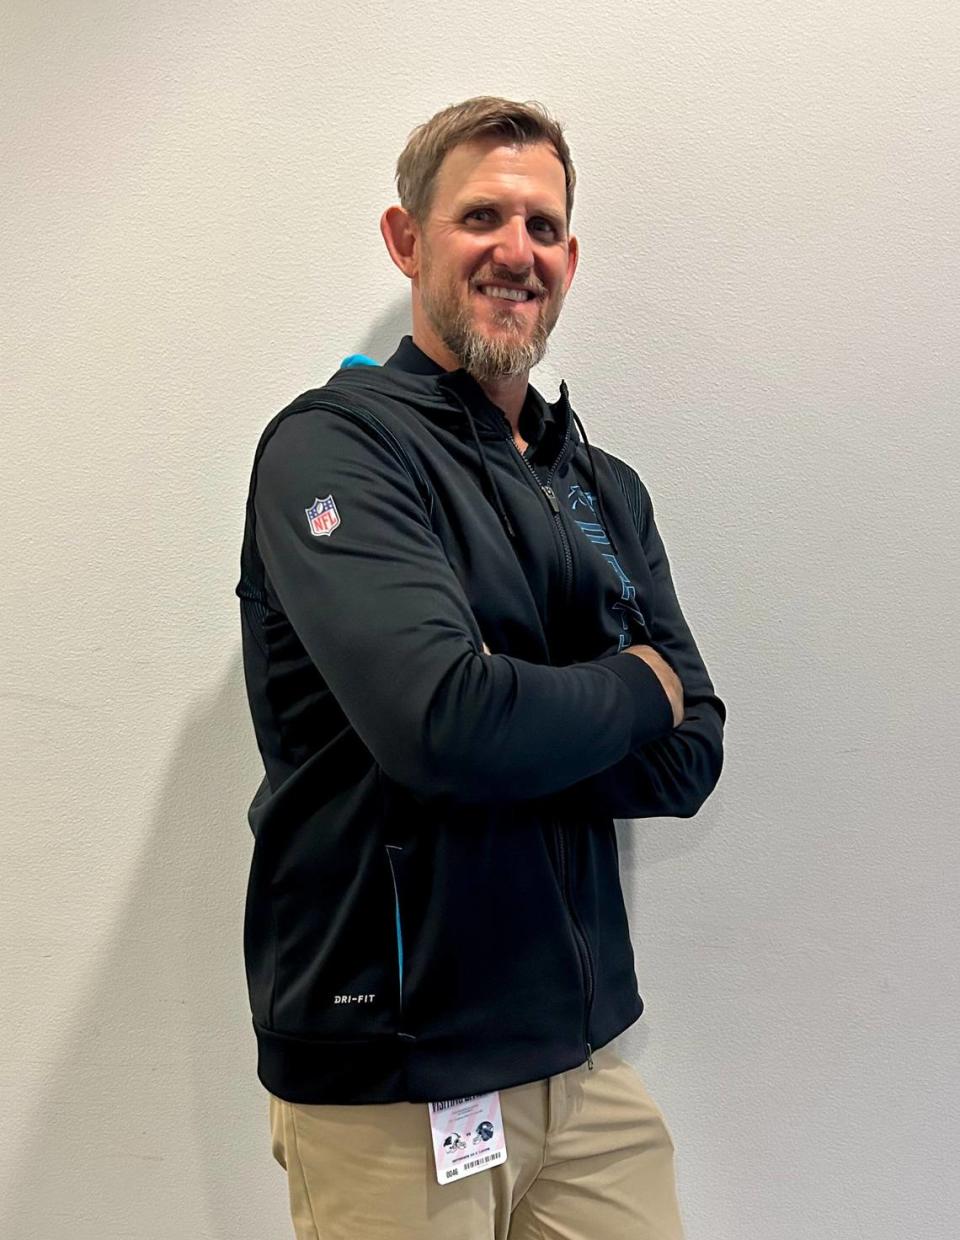 Jordan Gross, a former Pro Bowl offensive tackle for the Carolina Panthers, now is head coach of his former high school team in rural Idaho -- the Fruitland Grizzlies. He was photographed on Sept. 24, 2023, in Seattle.